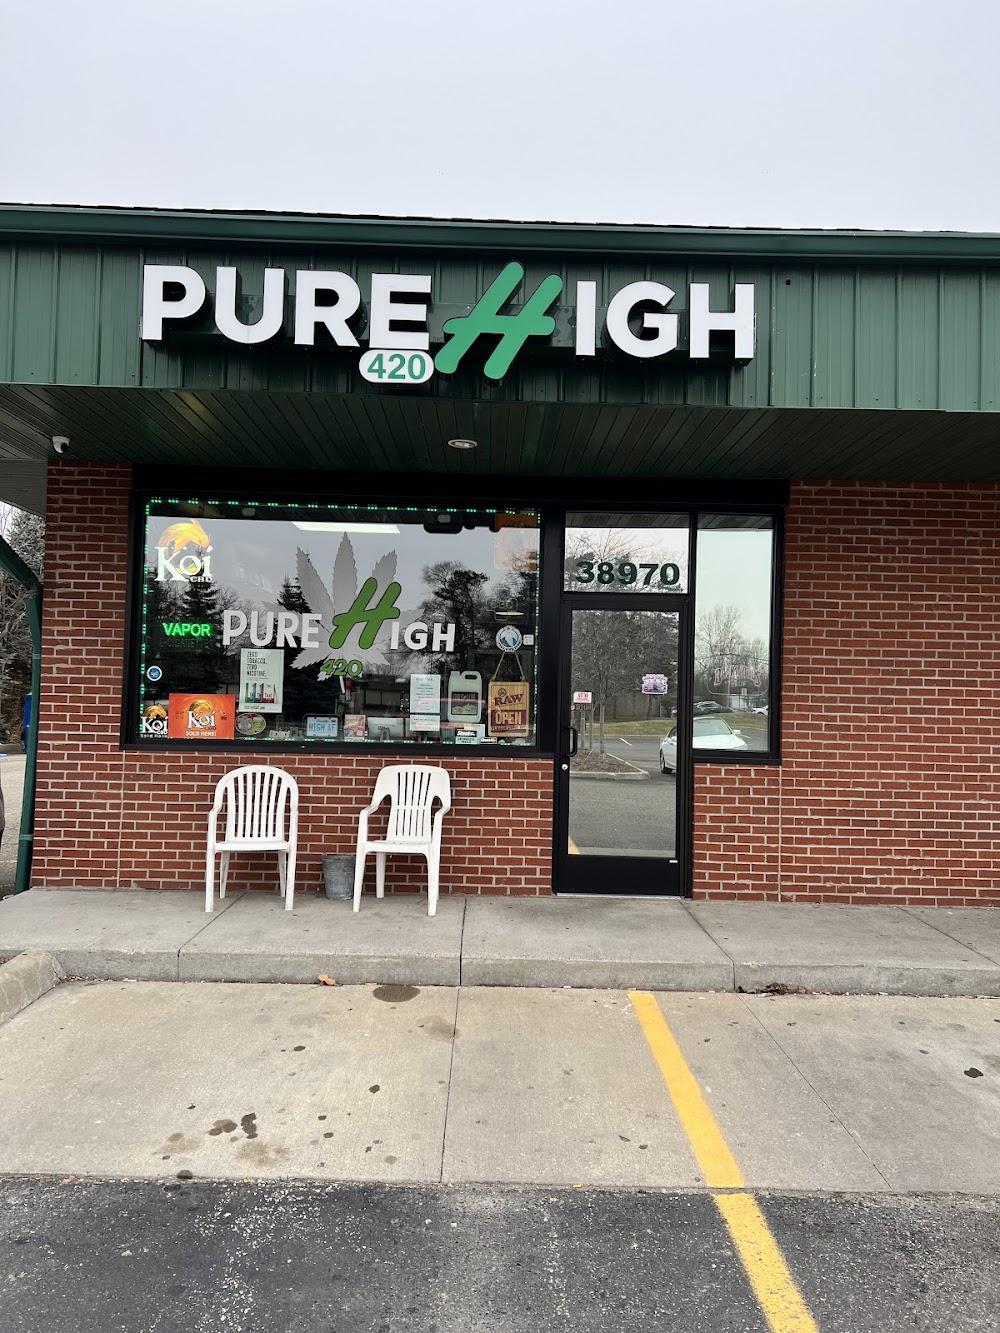 PURE HIGH 420 CBD-THC Cannabis Seeds. We Are Your ONE STOP SHOP